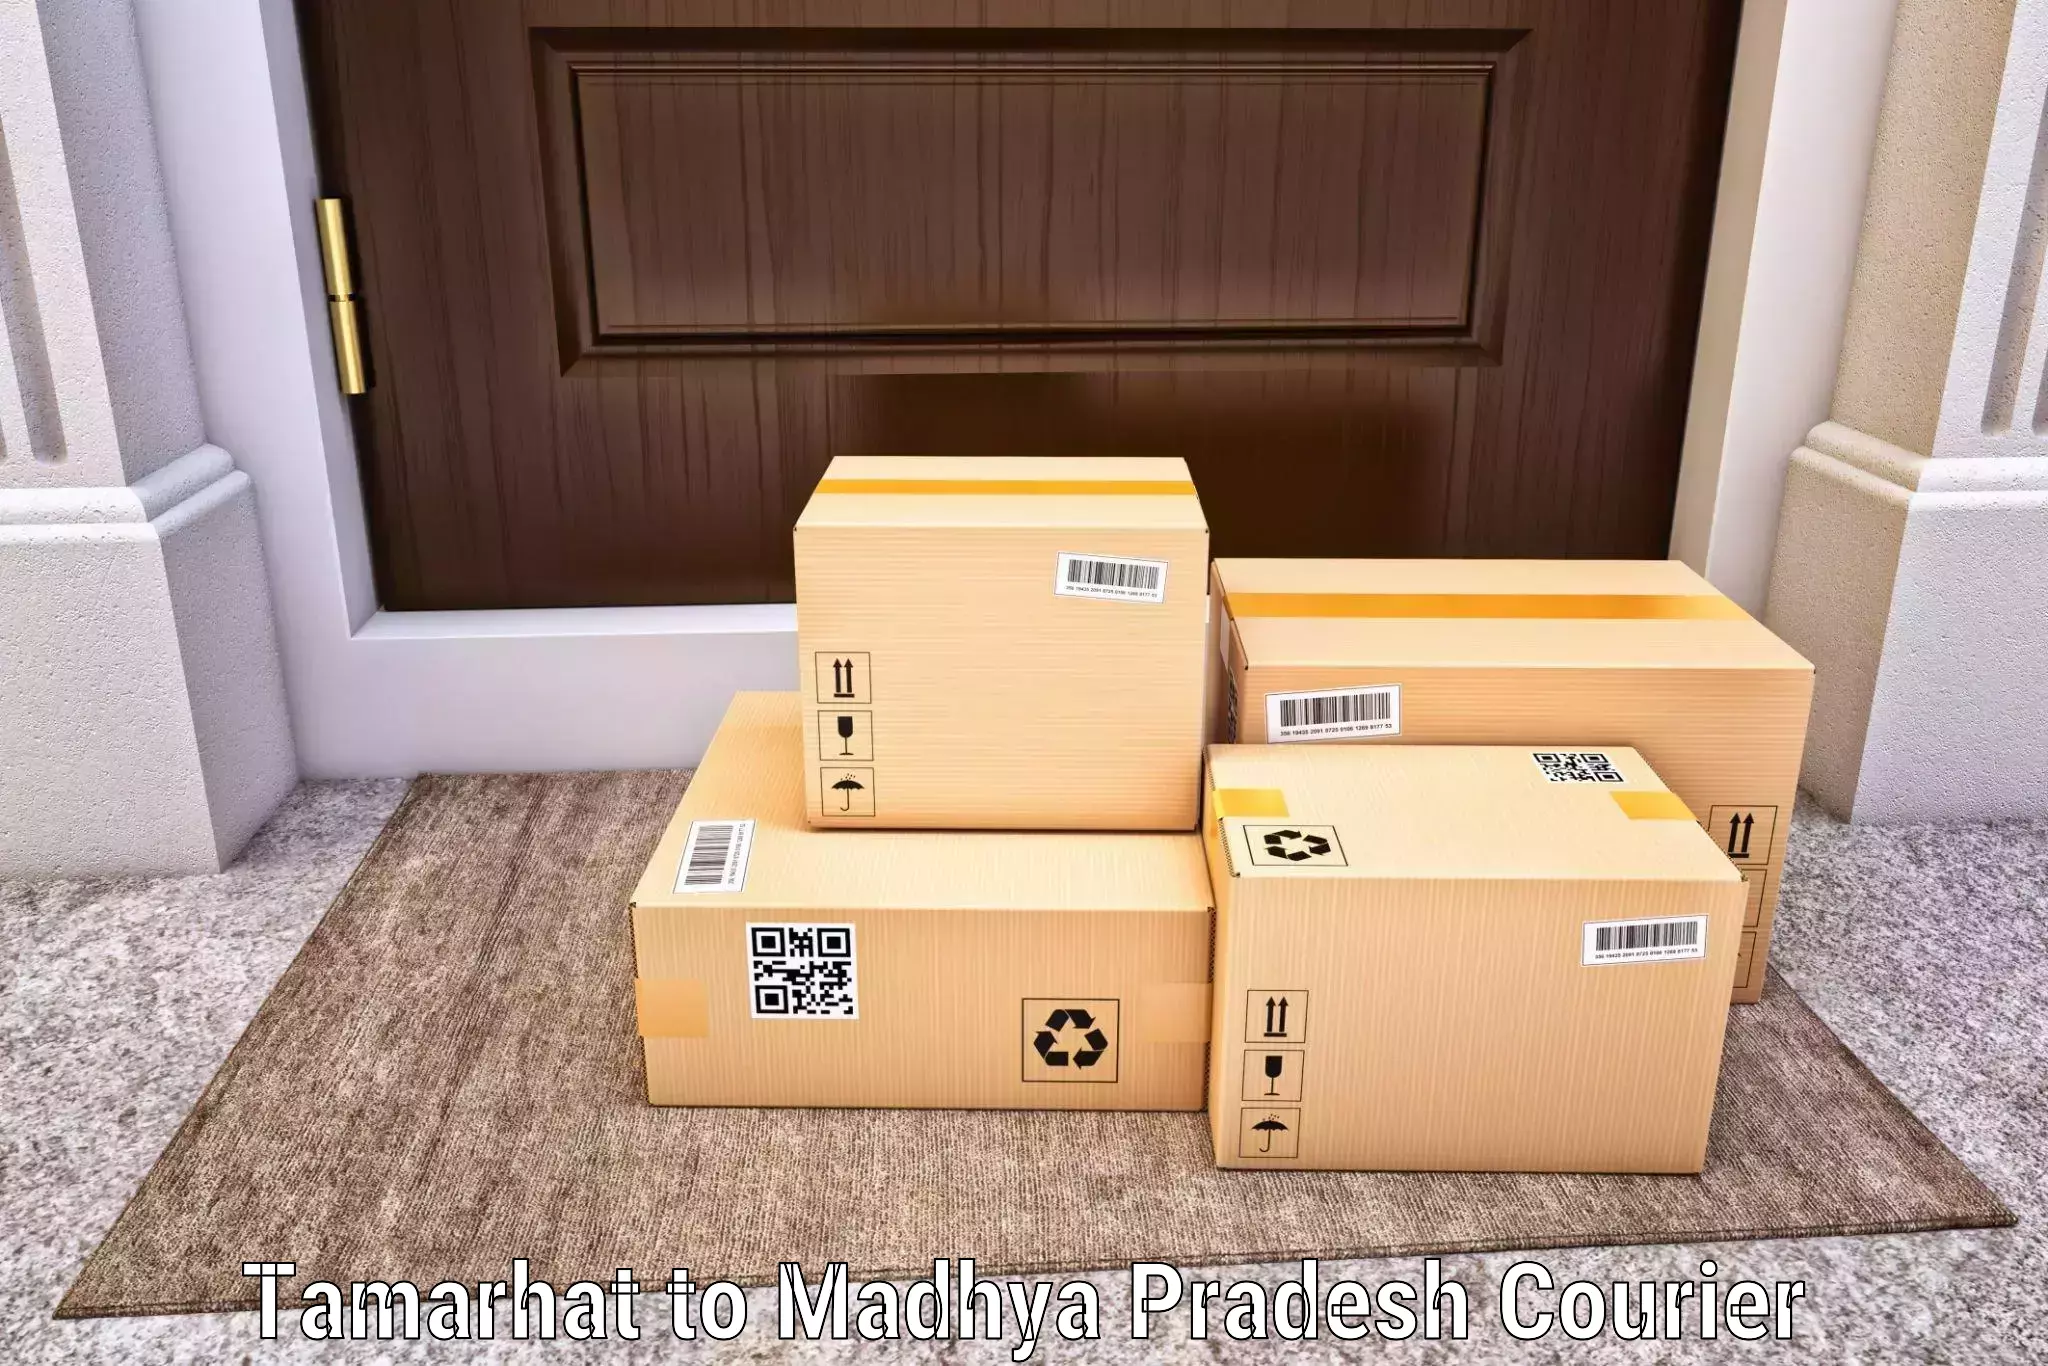 Package consolidation Tamarhat to Bareli